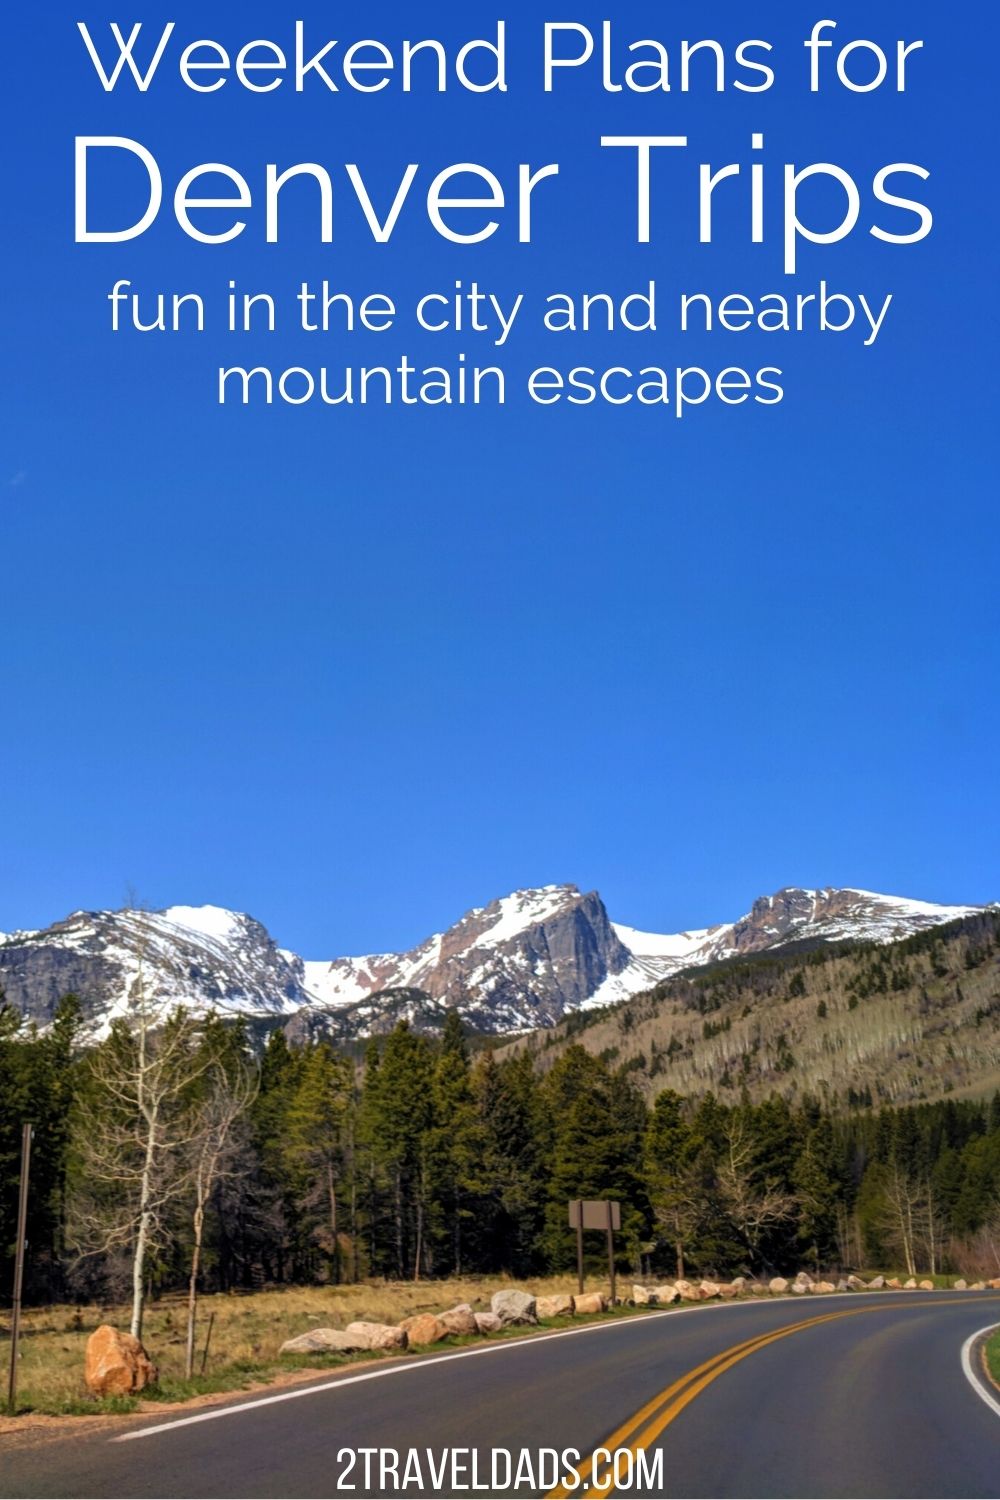 Easy and fun weekend plans in and around Denver. Whether you want to explore the city or head to nearby mountain towns, these great plans are perfect for a getaway to or from Denver, Colorado.